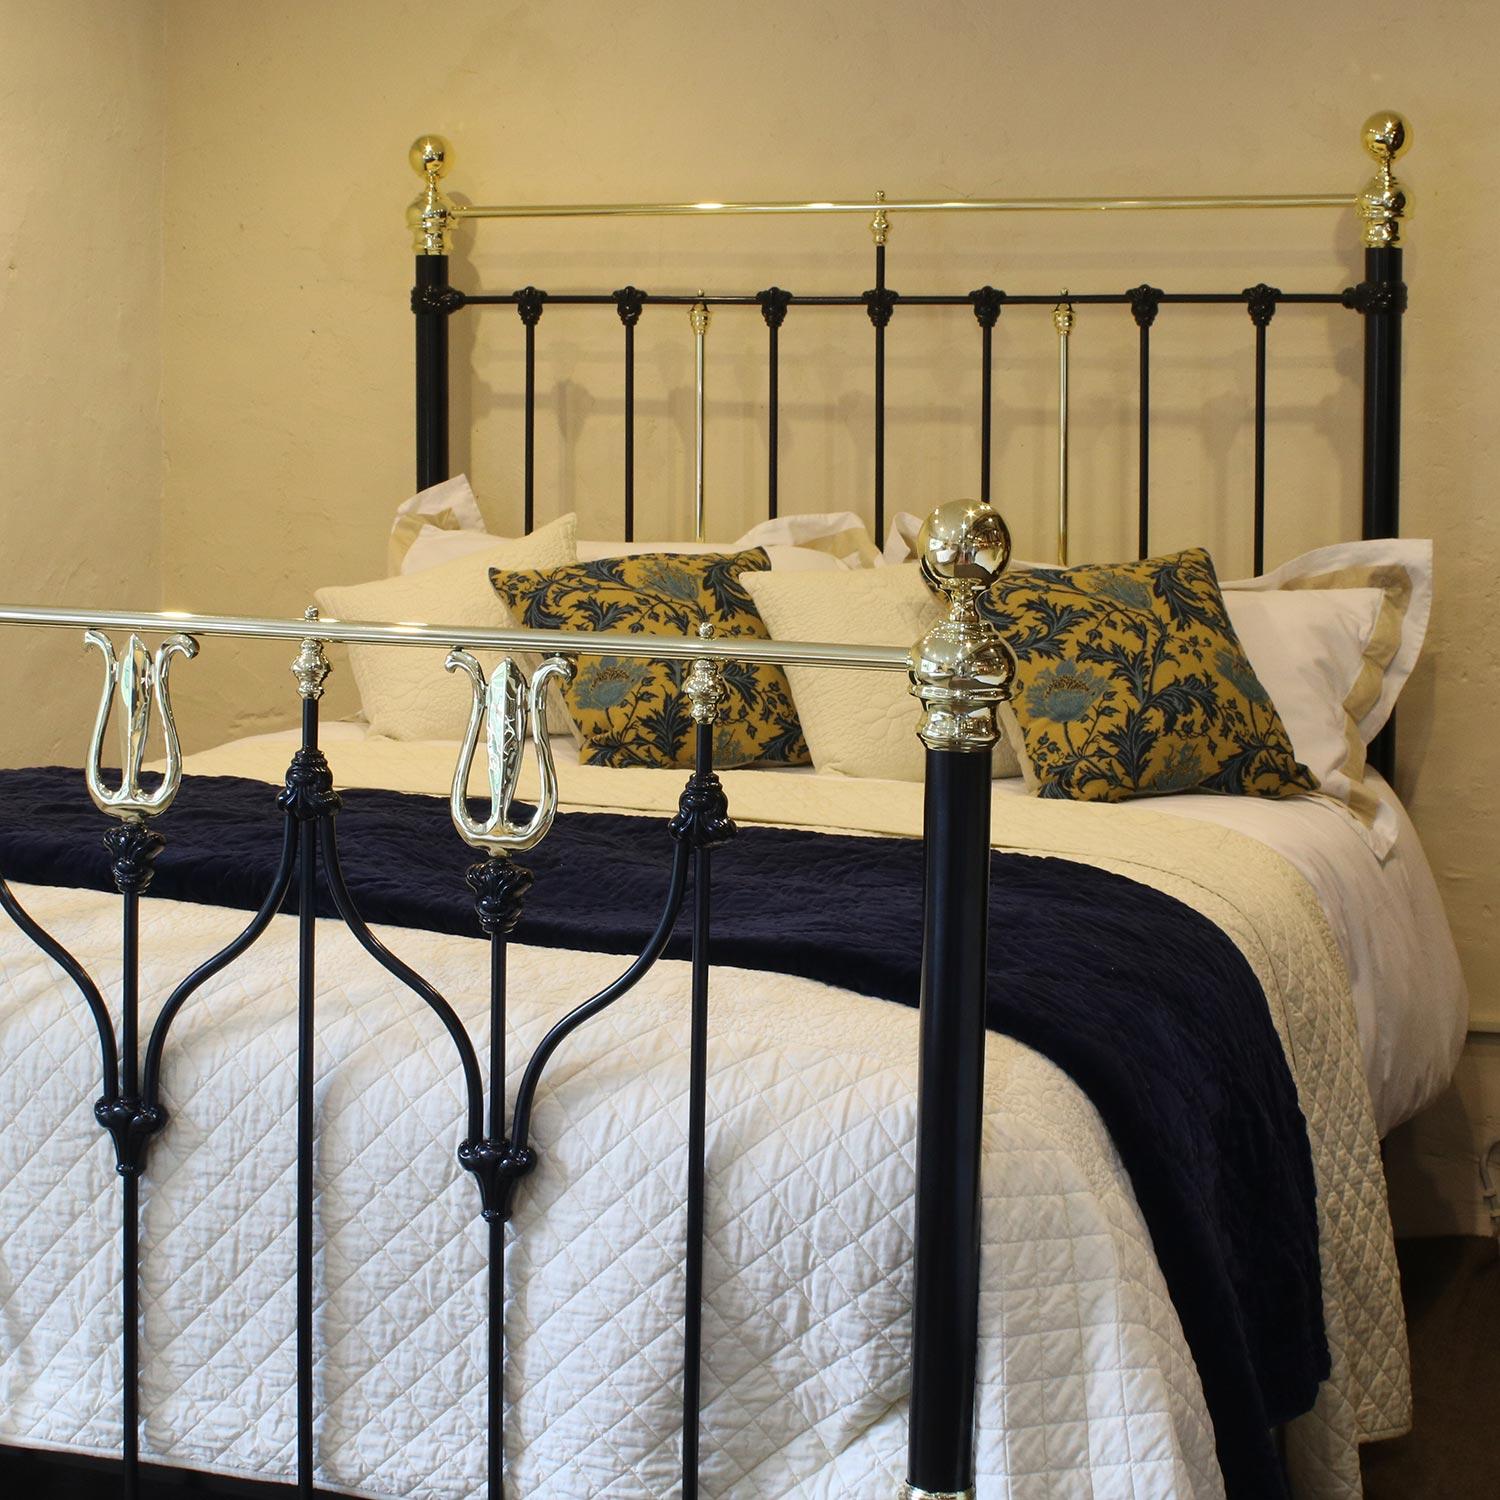 A superb brass and iron bedstead with Art Nouveau brass castings, finished in black.

This bed accepts a British king-size or US queen-size (measure: 5ft, 60 in or 150cm wide) base and mattress set.

The price is for the bed frame alone. The